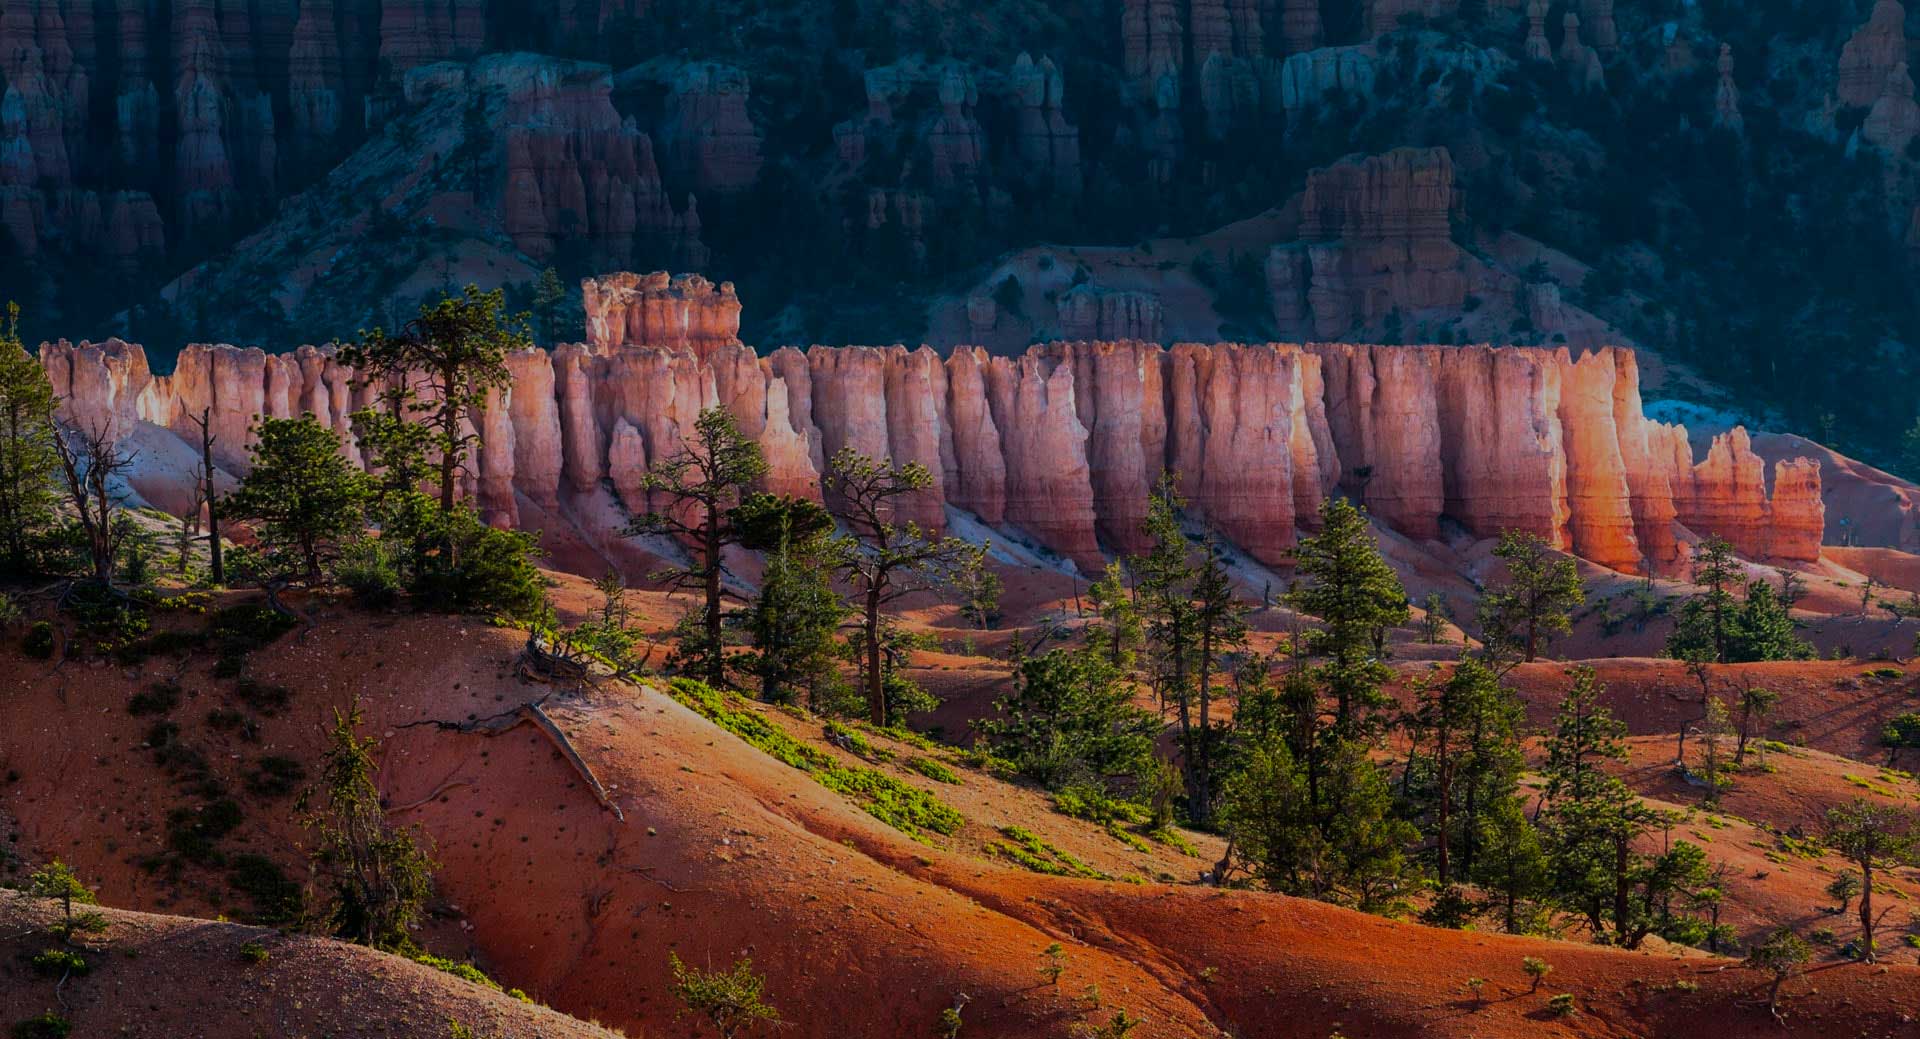 Planning a trip to Bryce Canyon National Park